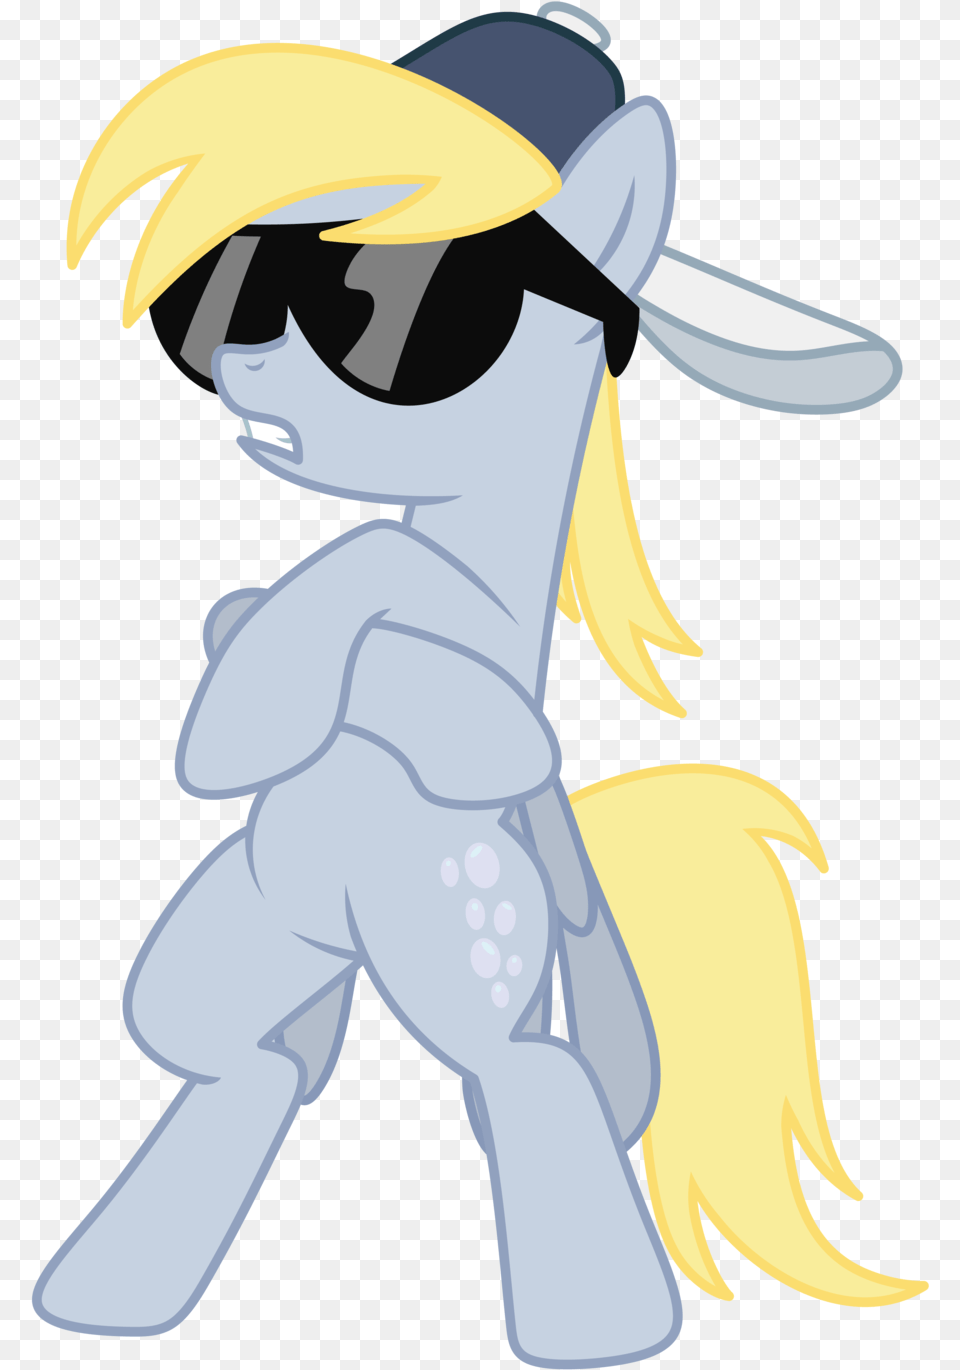 Derpy S Got Swag By Axemgr D4ollqp Rainbow Dash With Glasses, Book, Comics, Publication, Baby Png